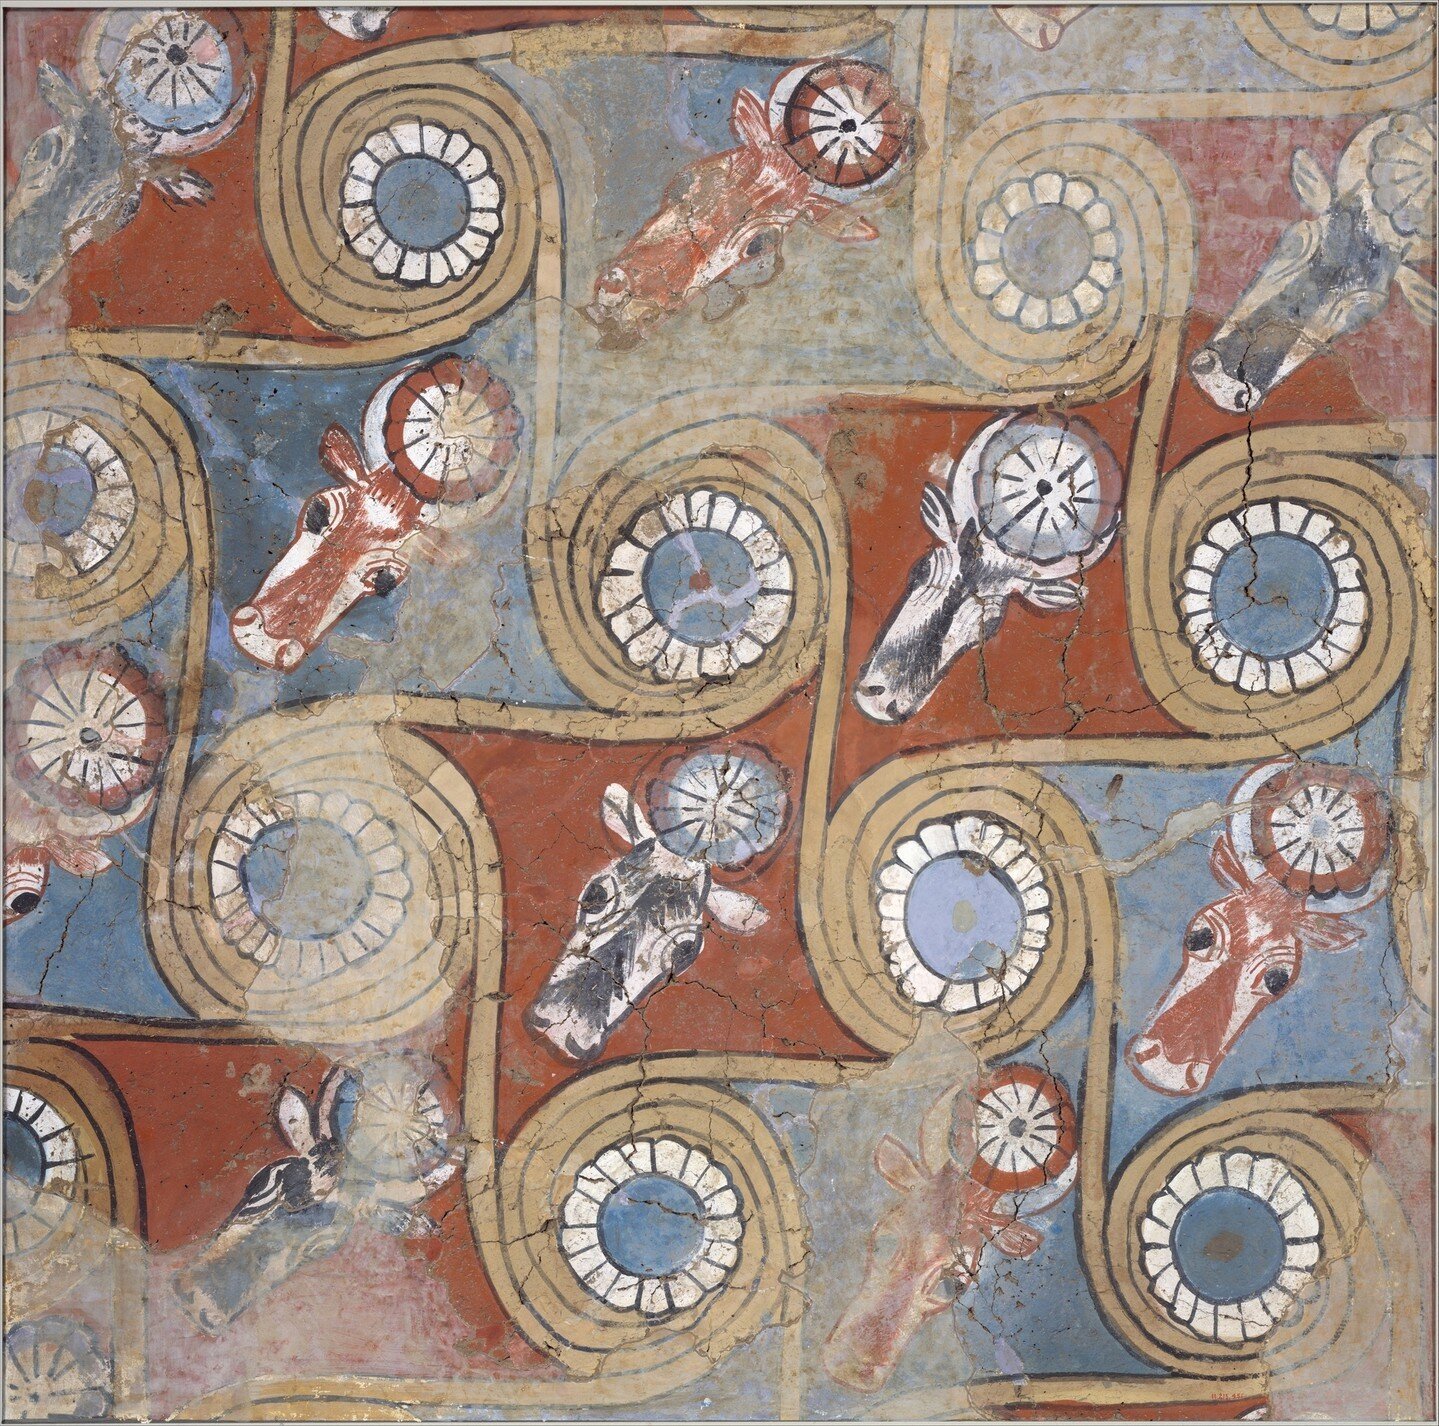 Ceiling painting from the palace of Amenhotep III, Egypt,  ca. 1390&ndash;1352 B.C.⁠
⁠
#egypt #⁠
⁠
https://www.metmuseum.org/art/collection/search/544502